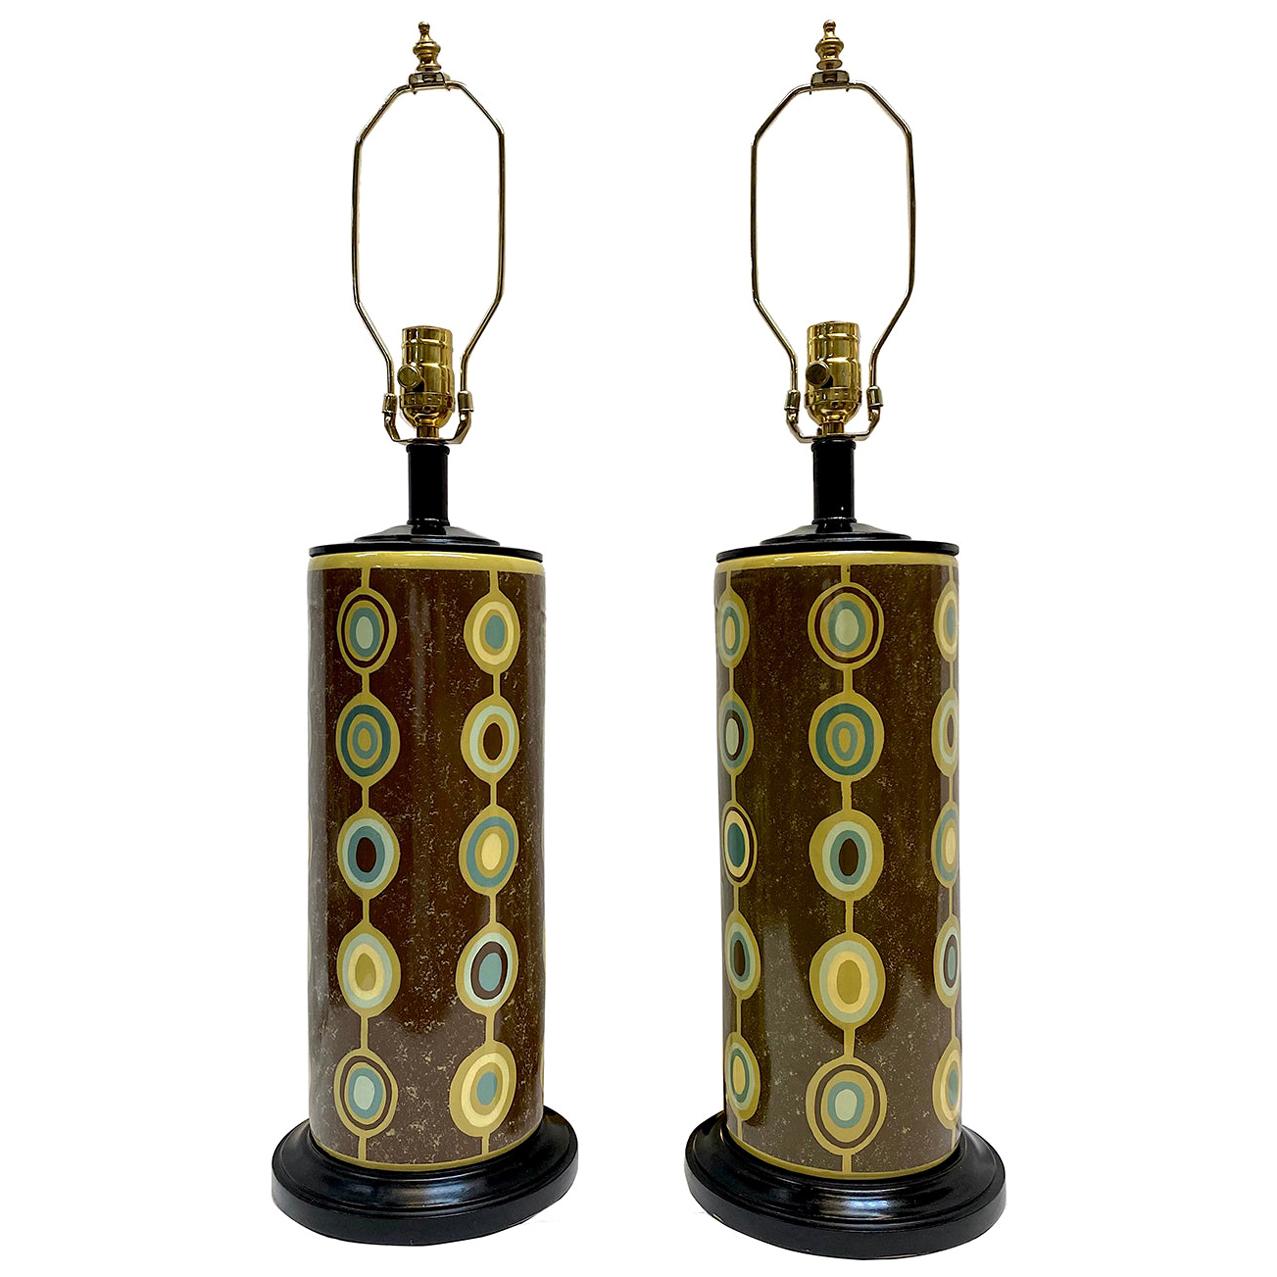 Pair of Moderne Porcelain Table Lamps 